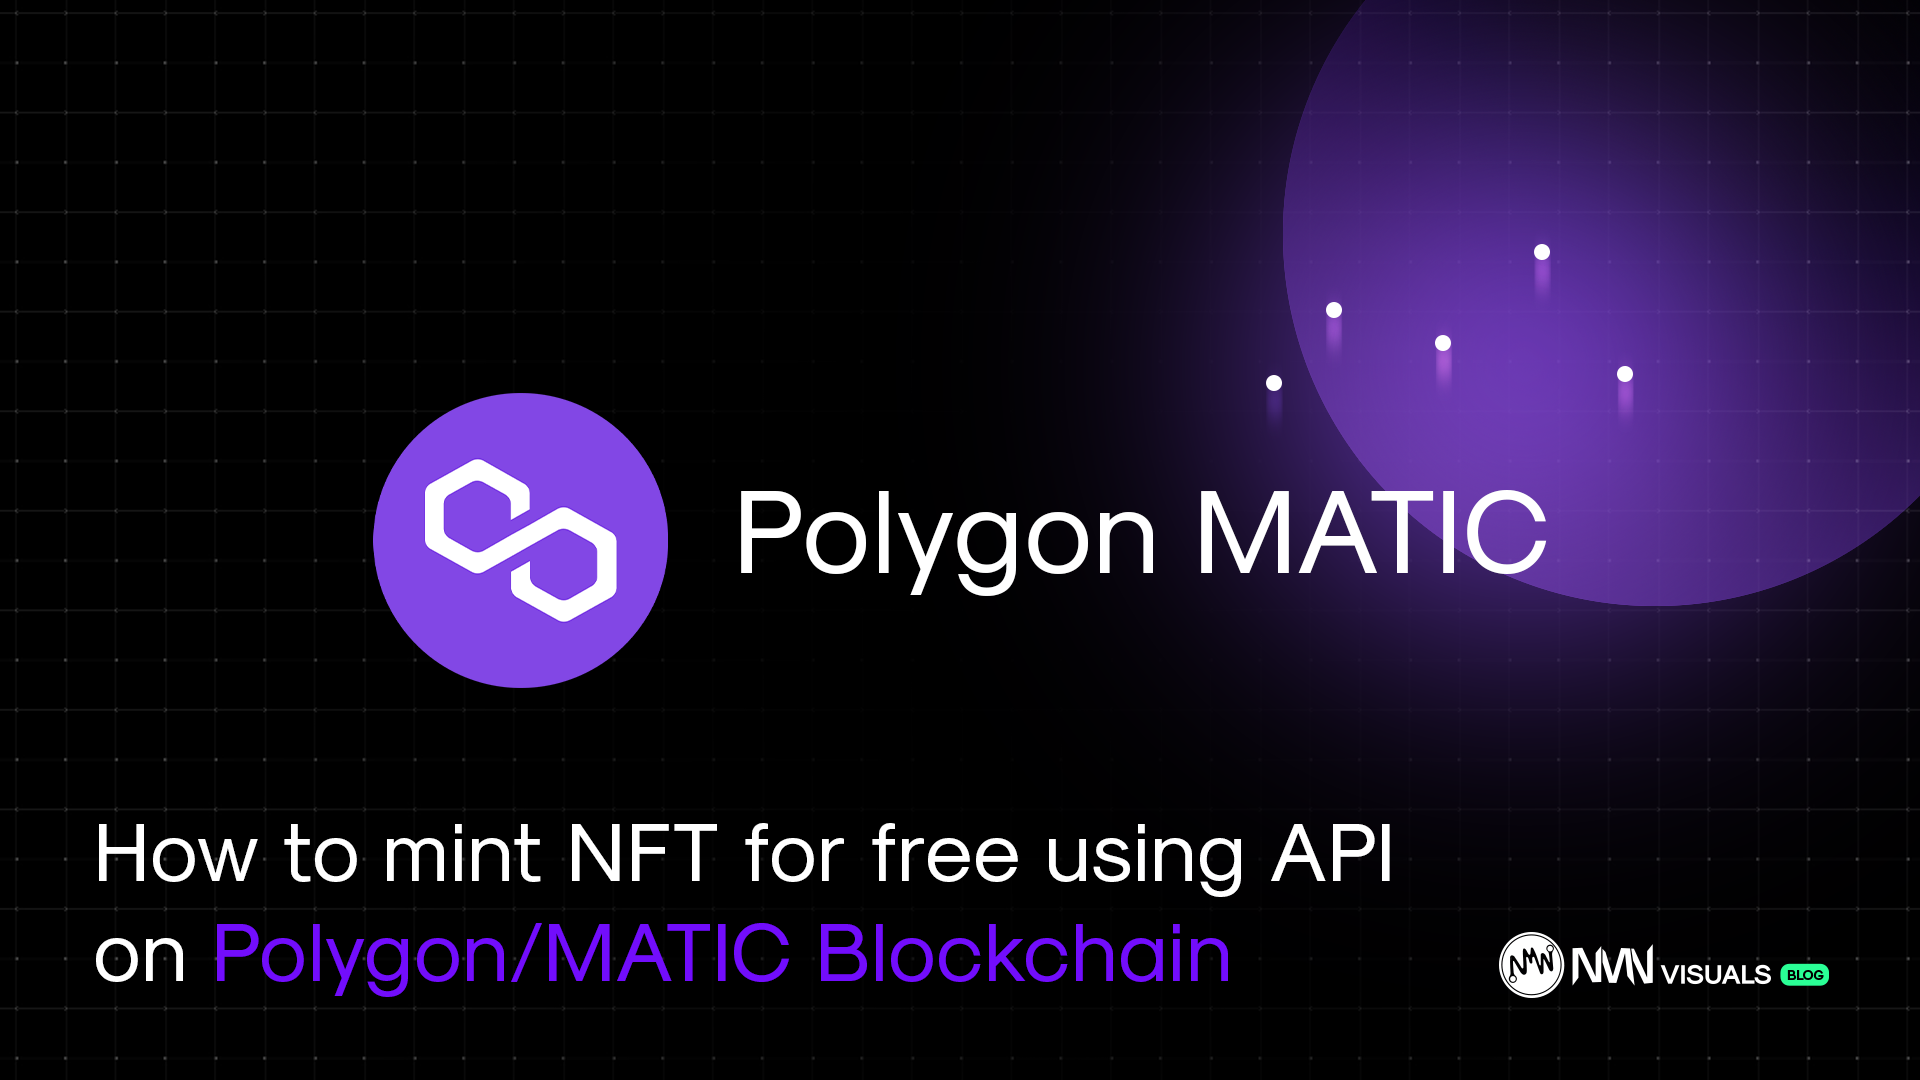 How to Mint NFT for free without using API on Polygon/Matic